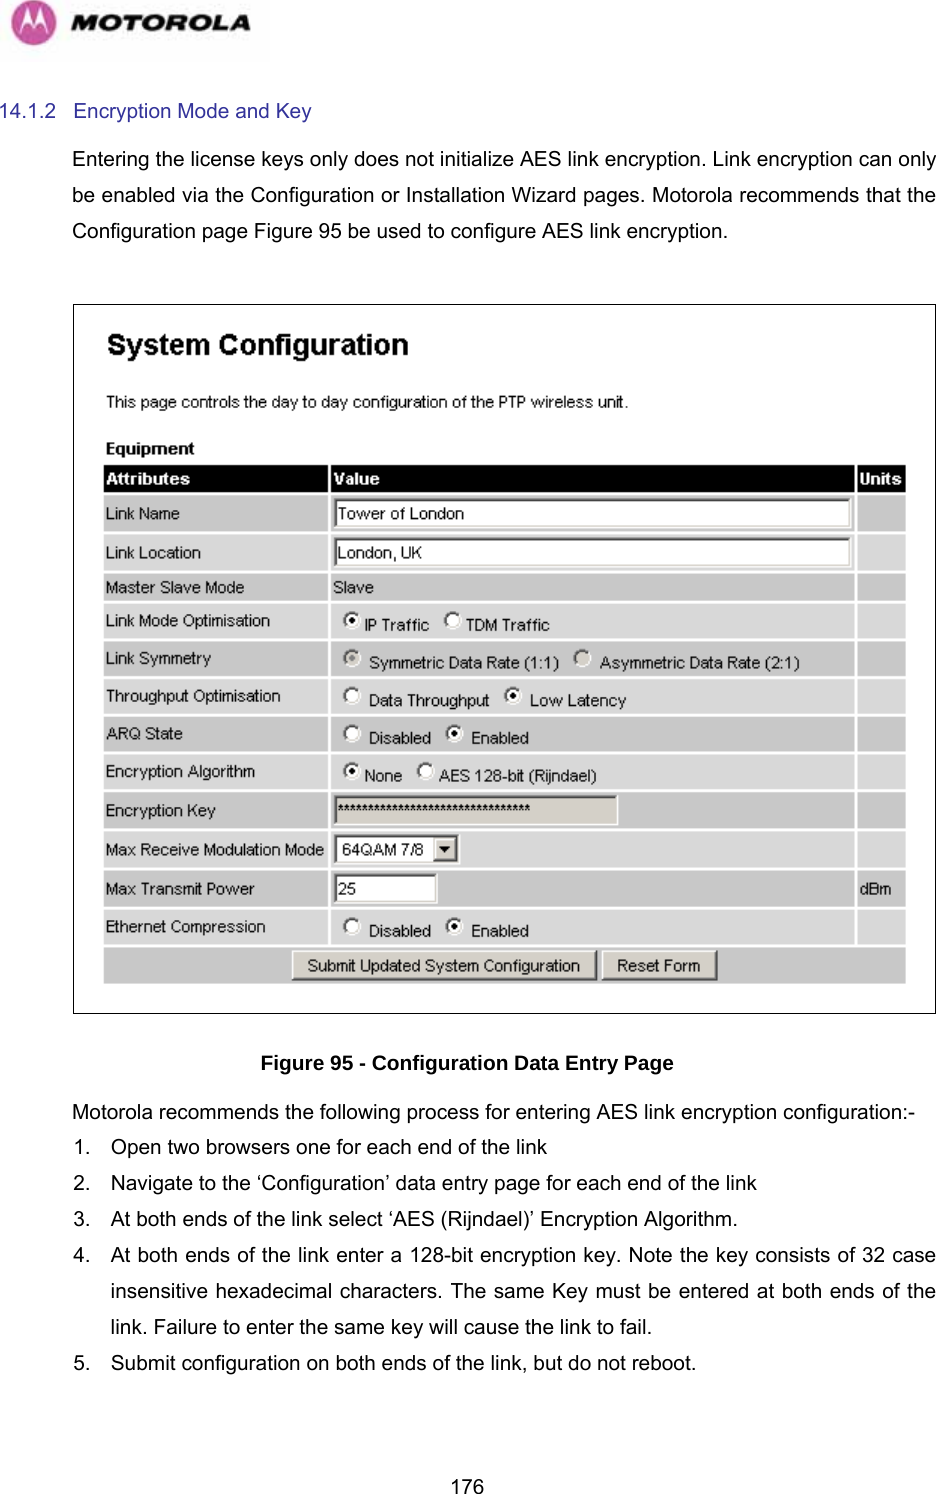   17614.1.2  Encryption Mode and Key Entering the license keys only does not initialize AES link encryption. Link encryption can only be enabled via the Configuration or Installation Wizard pages. Motorola recommends that the Configuration page Figure 95 be used to configure AES link encryption.   Figure 95 - Configuration Data Entry Page Motorola recommends the following process for entering AES link encryption configuration:- 1.  Open two browsers one for each end of the link 2.  Navigate to the ‘Configuration’ data entry page for each end of the link 3.  At both ends of the link select ‘AES (Rijndael)’ Encryption Algorithm. 4.  At both ends of the link enter a 128-bit encryption key. Note the key consists of 32 case insensitive hexadecimal characters. The same Key must be entered at both ends of the link. Failure to enter the same key will cause the link to fail. 5.  Submit configuration on both ends of the link, but do not reboot. 